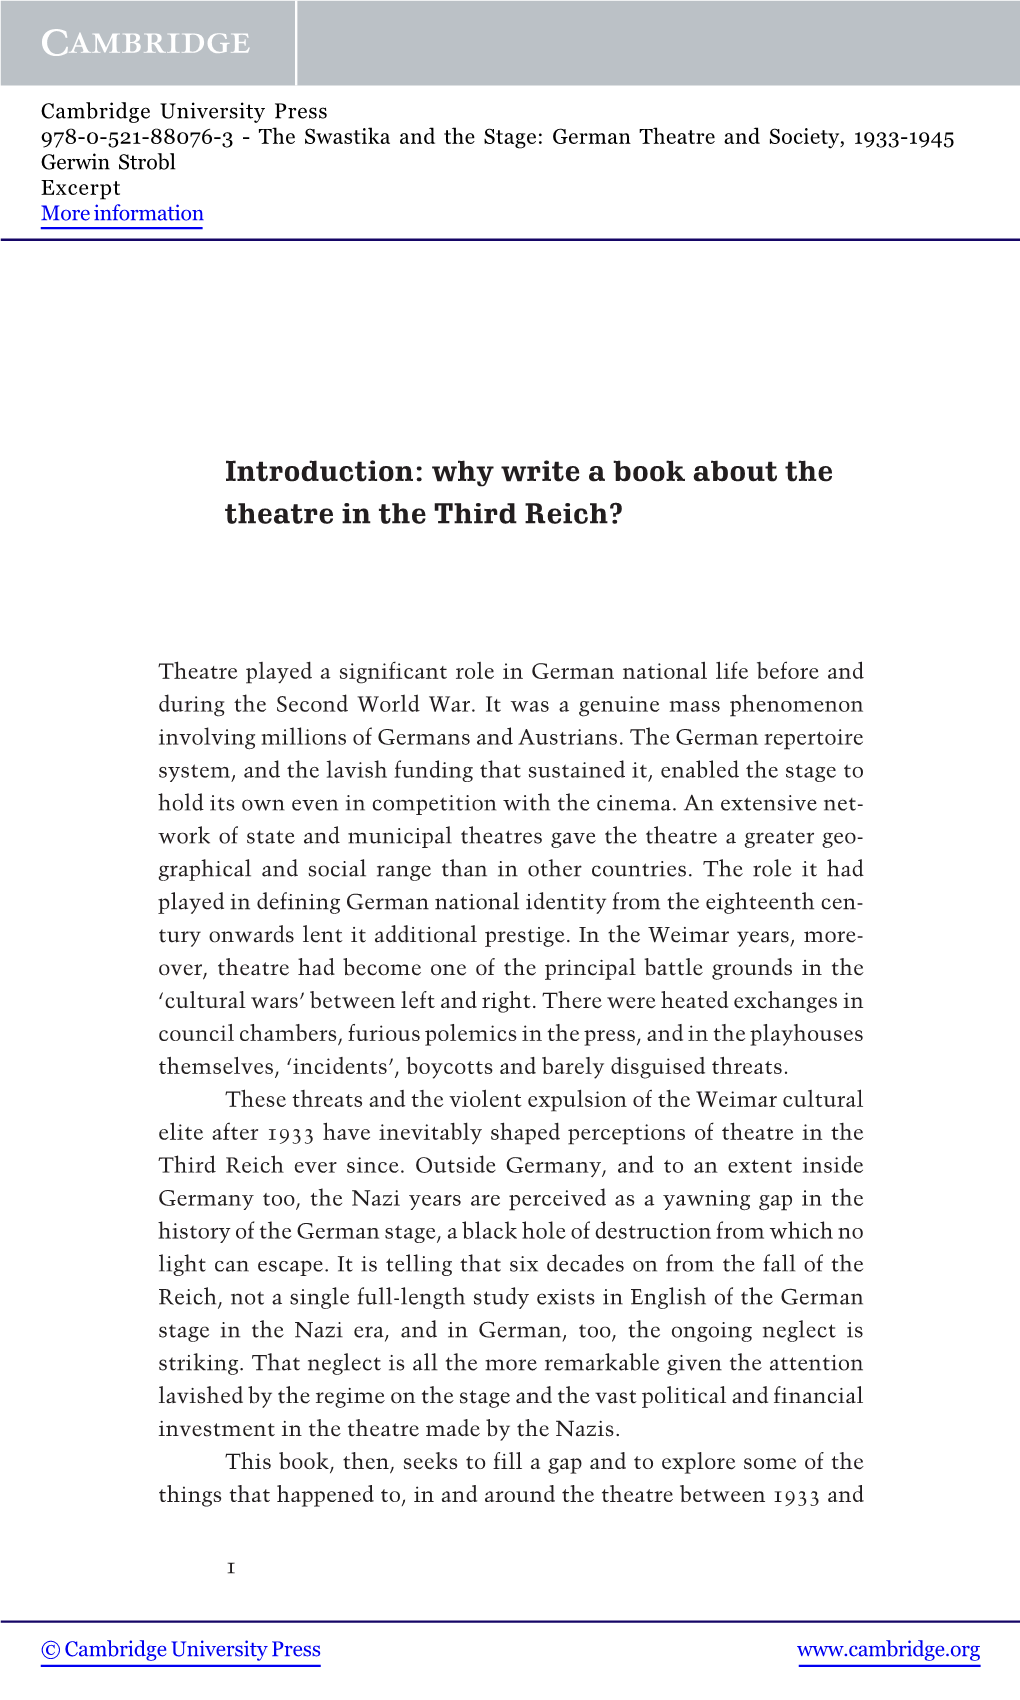 Why Write a Book About the Theatre in the Third Reich?